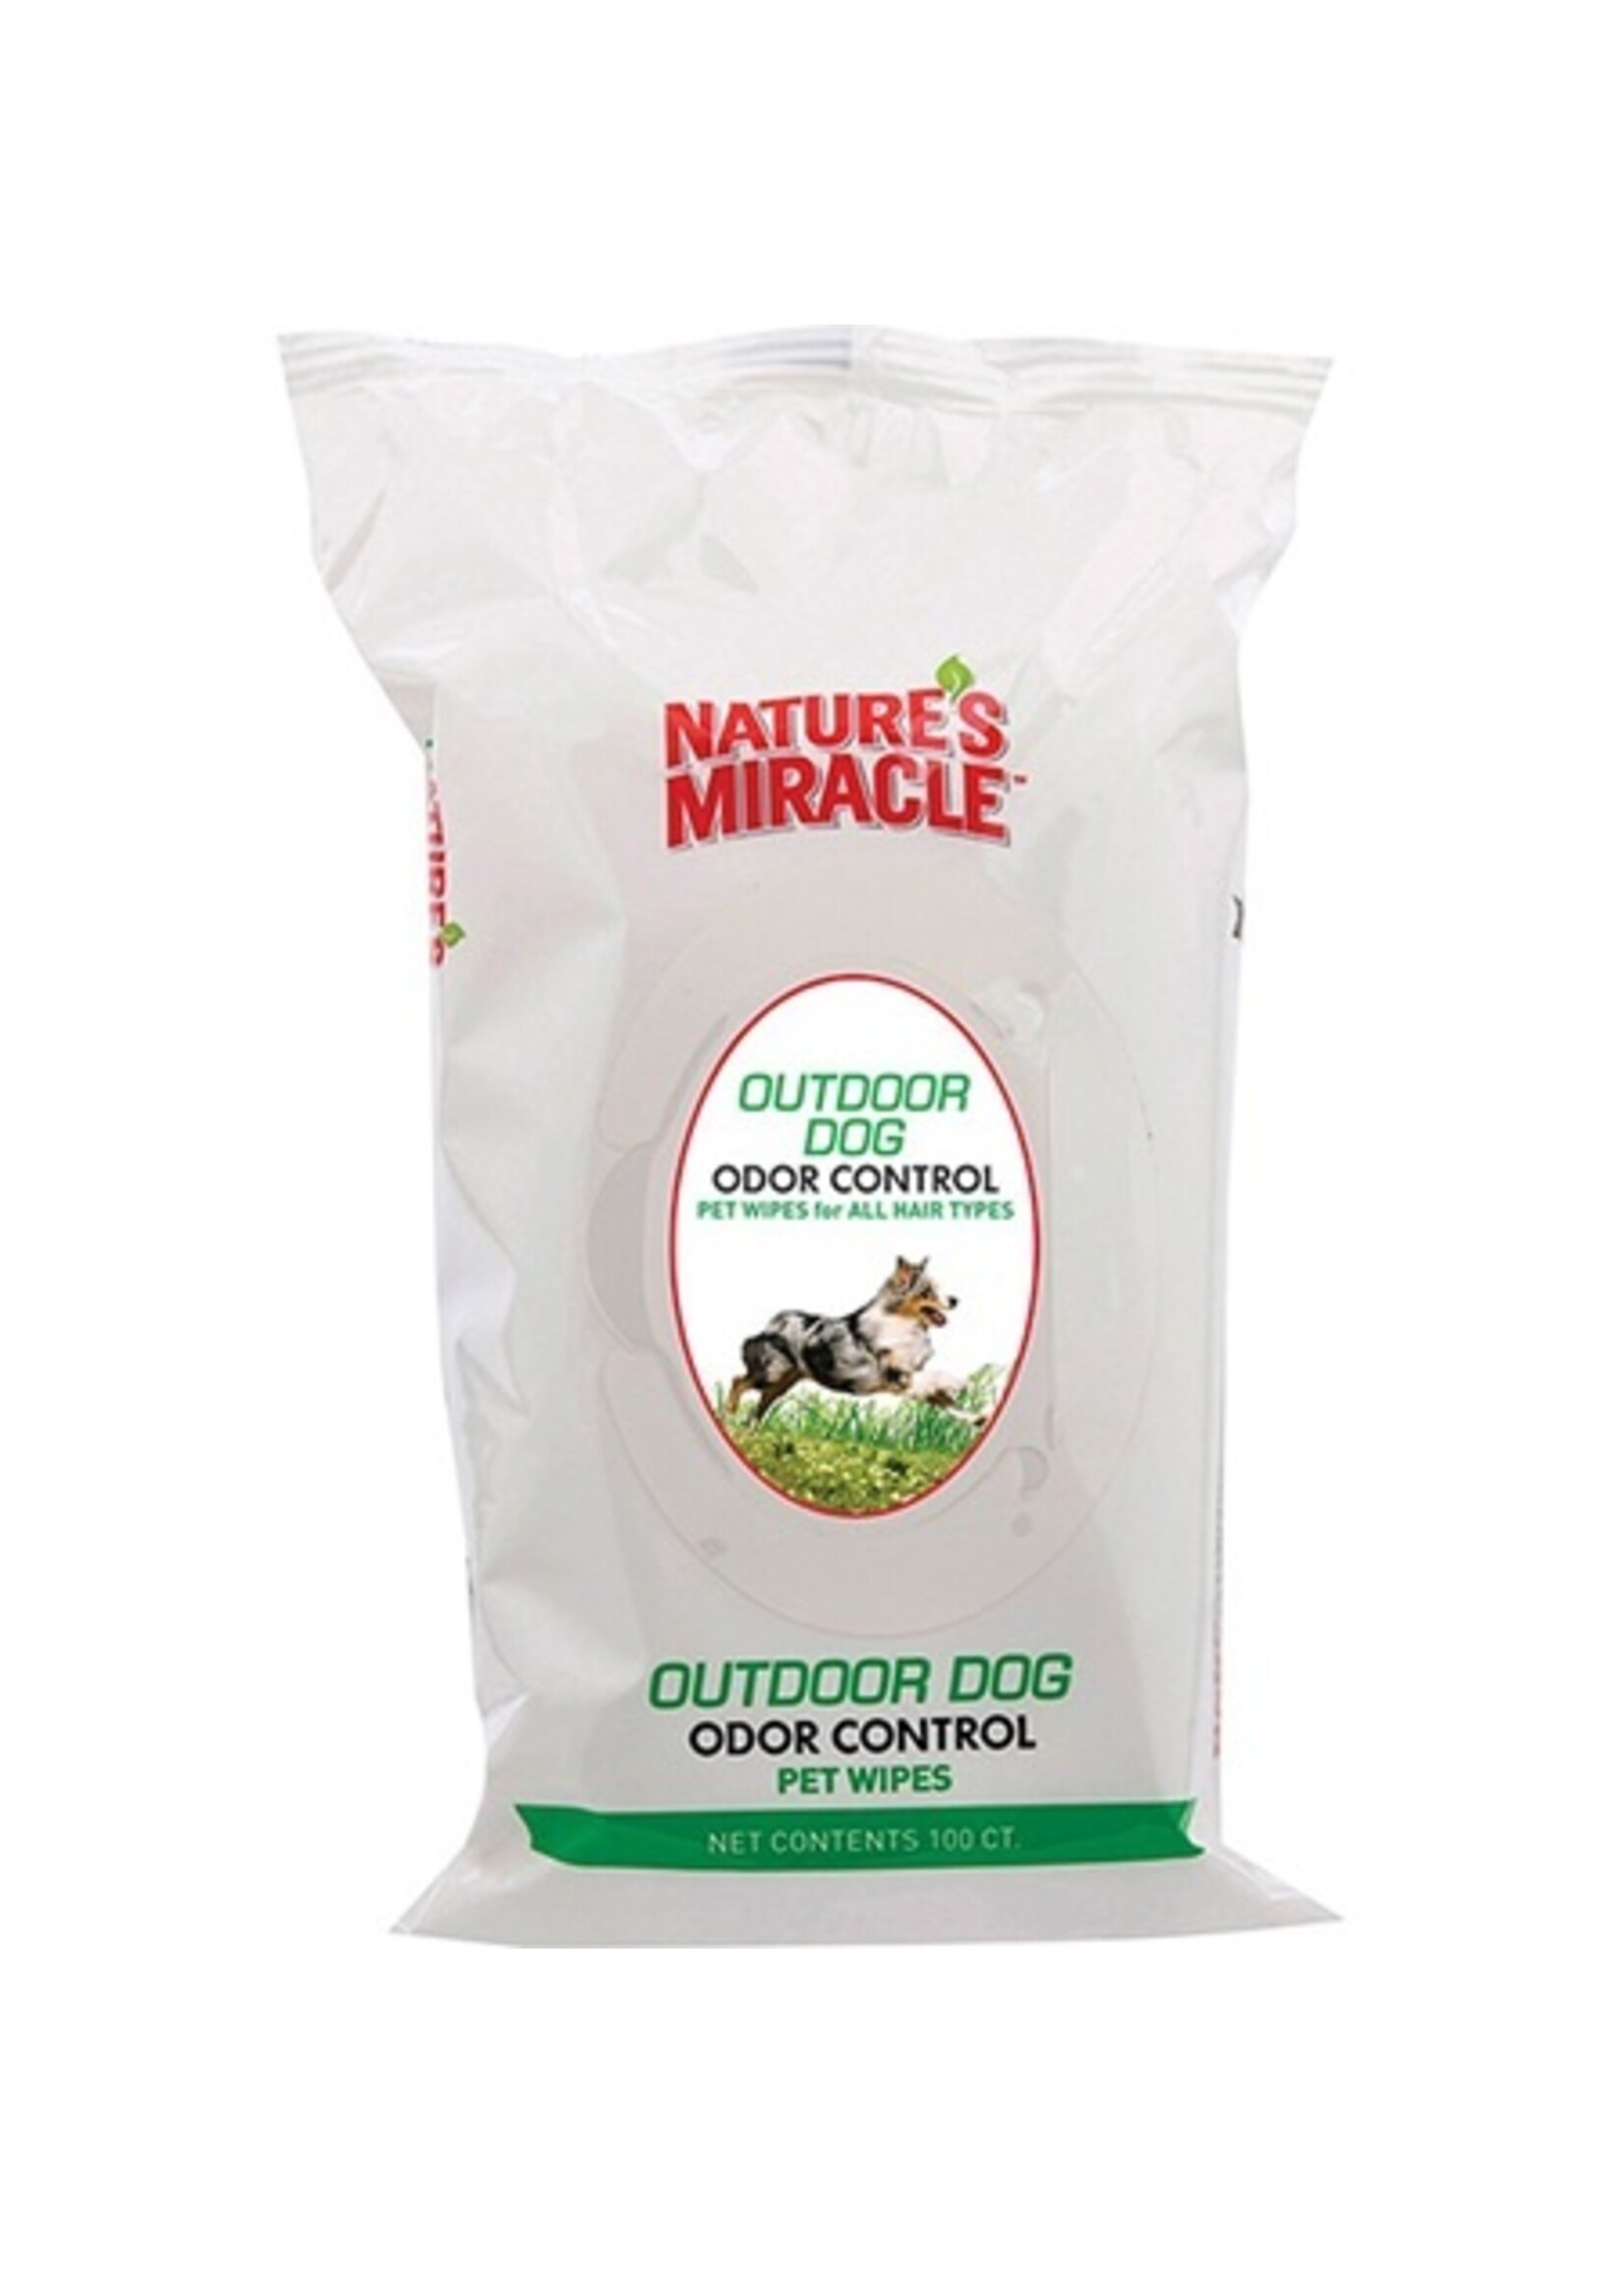 Nature's Miracle Nature's Miracle Outdoor Dog Wipes 100ct